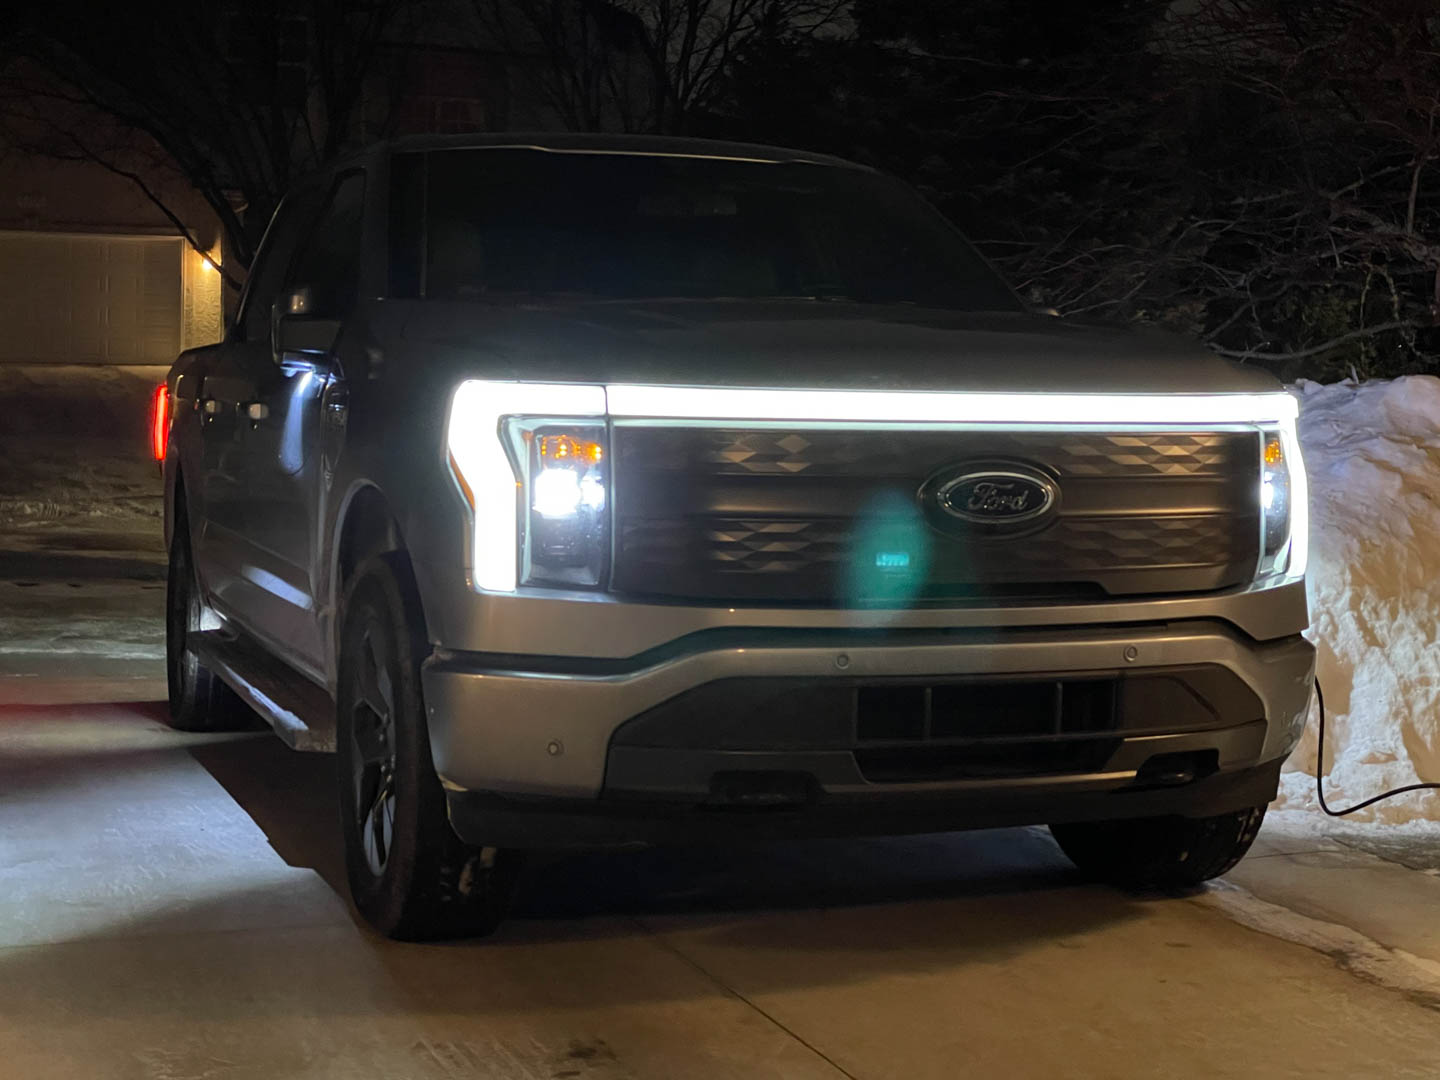 Ford CEO teases 2025 electric pickup as Millennium Falcon of trucks